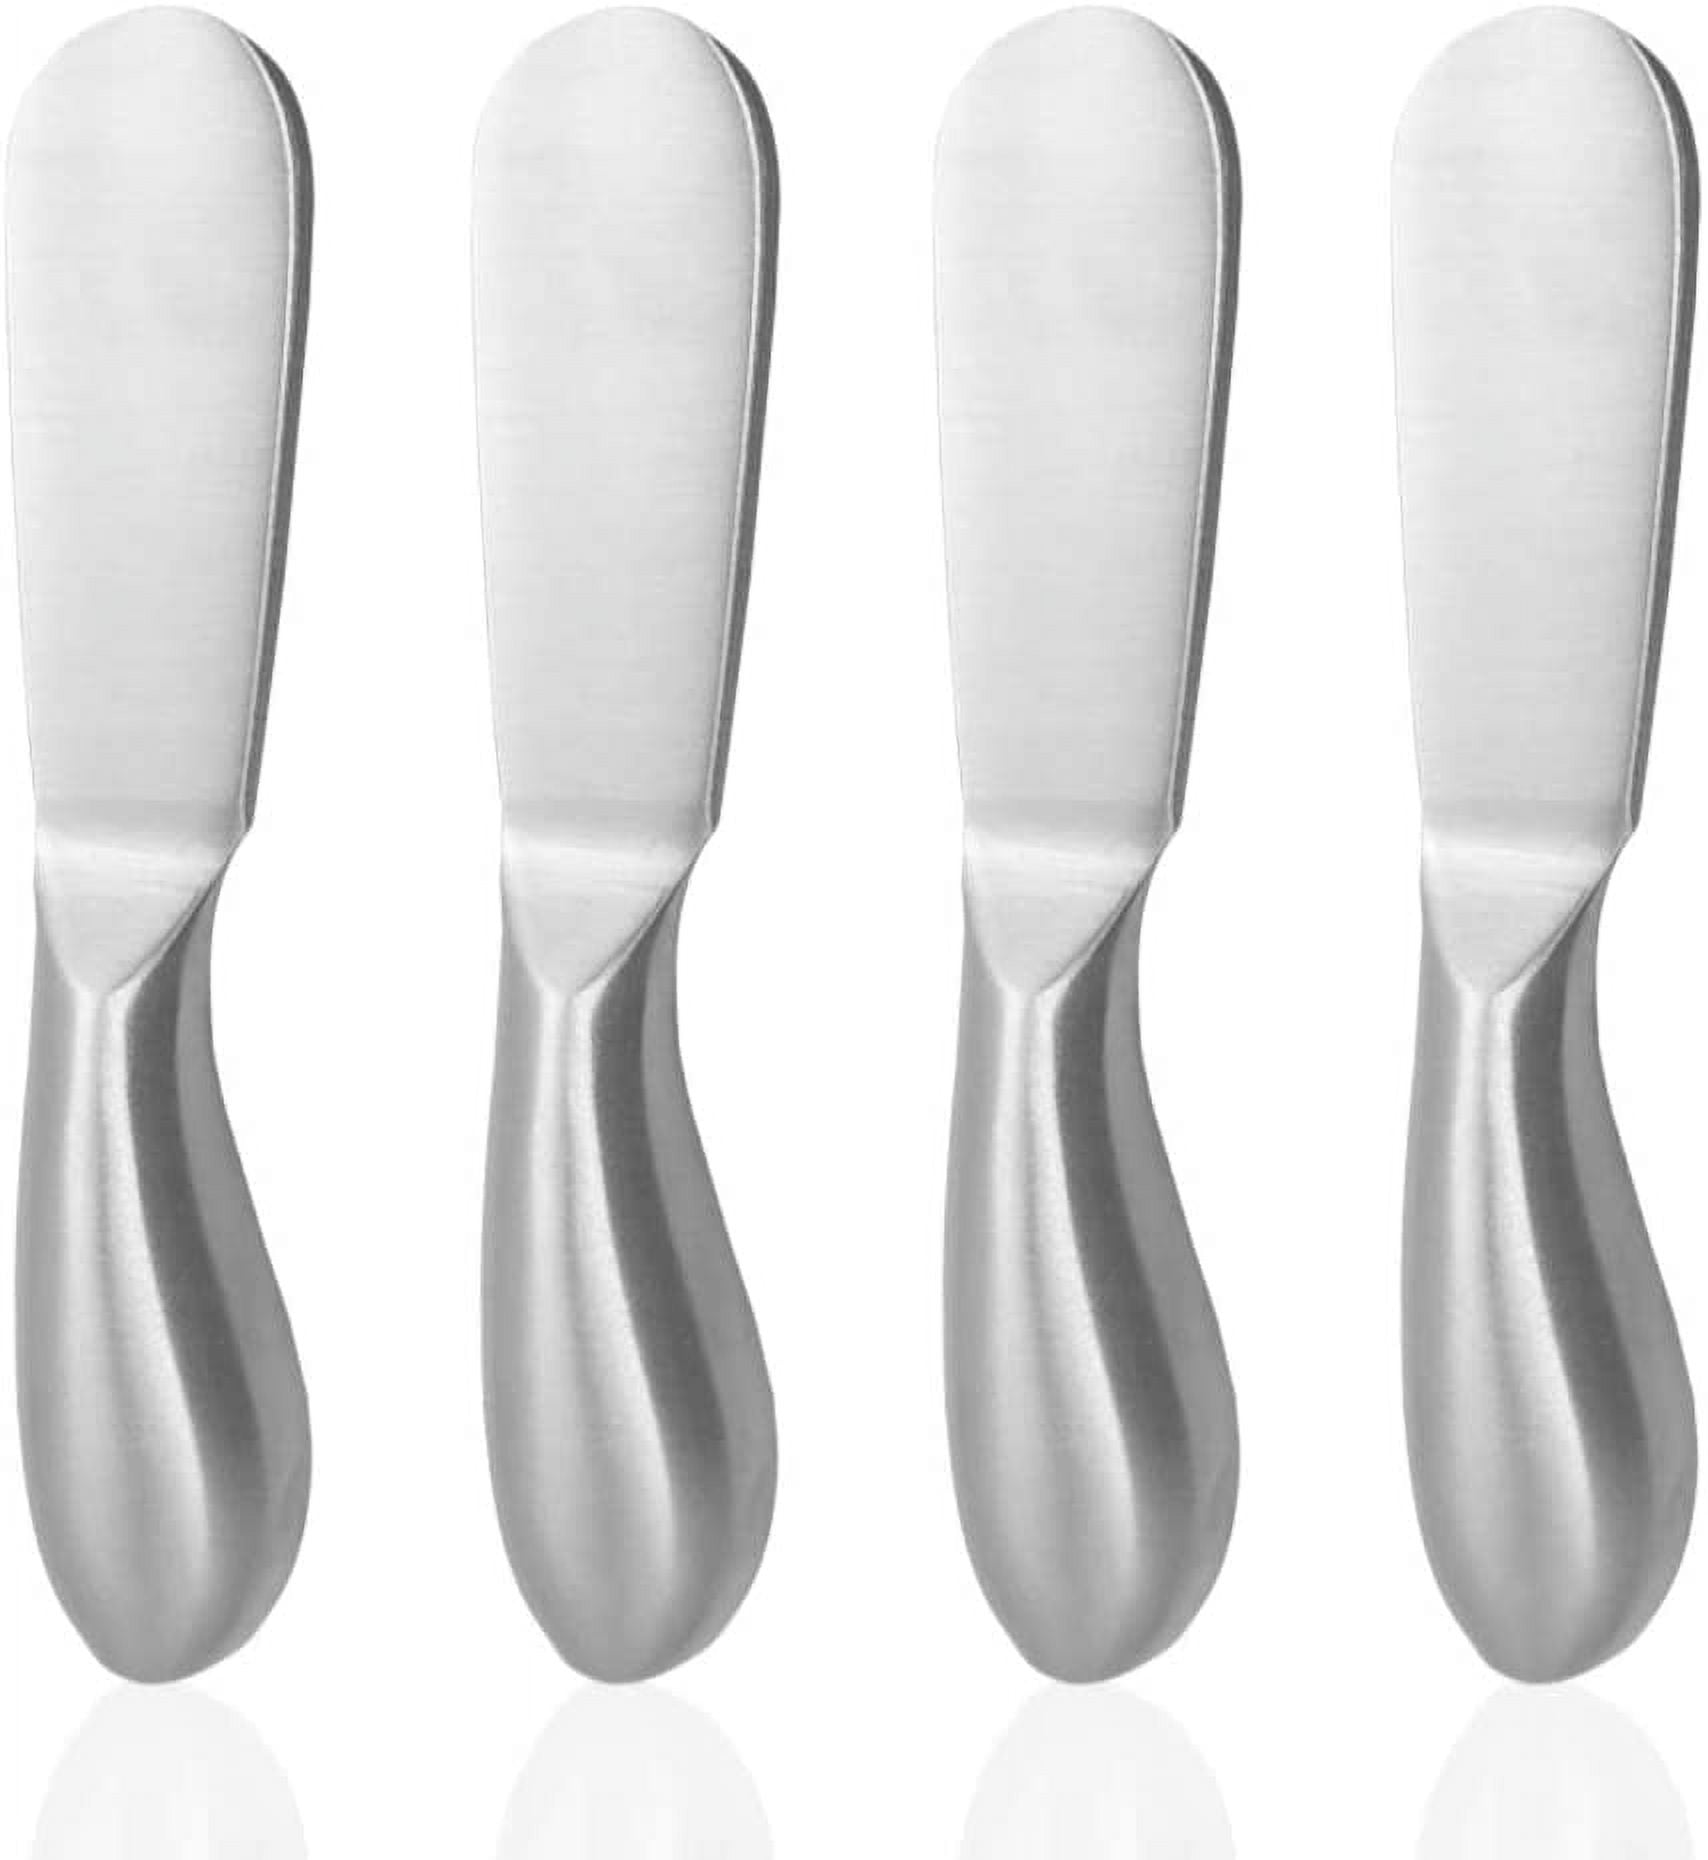 CATHYLIN REVERIE Collection 4-piece Stainless Steel Butter  Spreader Cheese Knife, Giftable Butter Knives set, Bread Knife set(4, White  Handle): Butter Knives